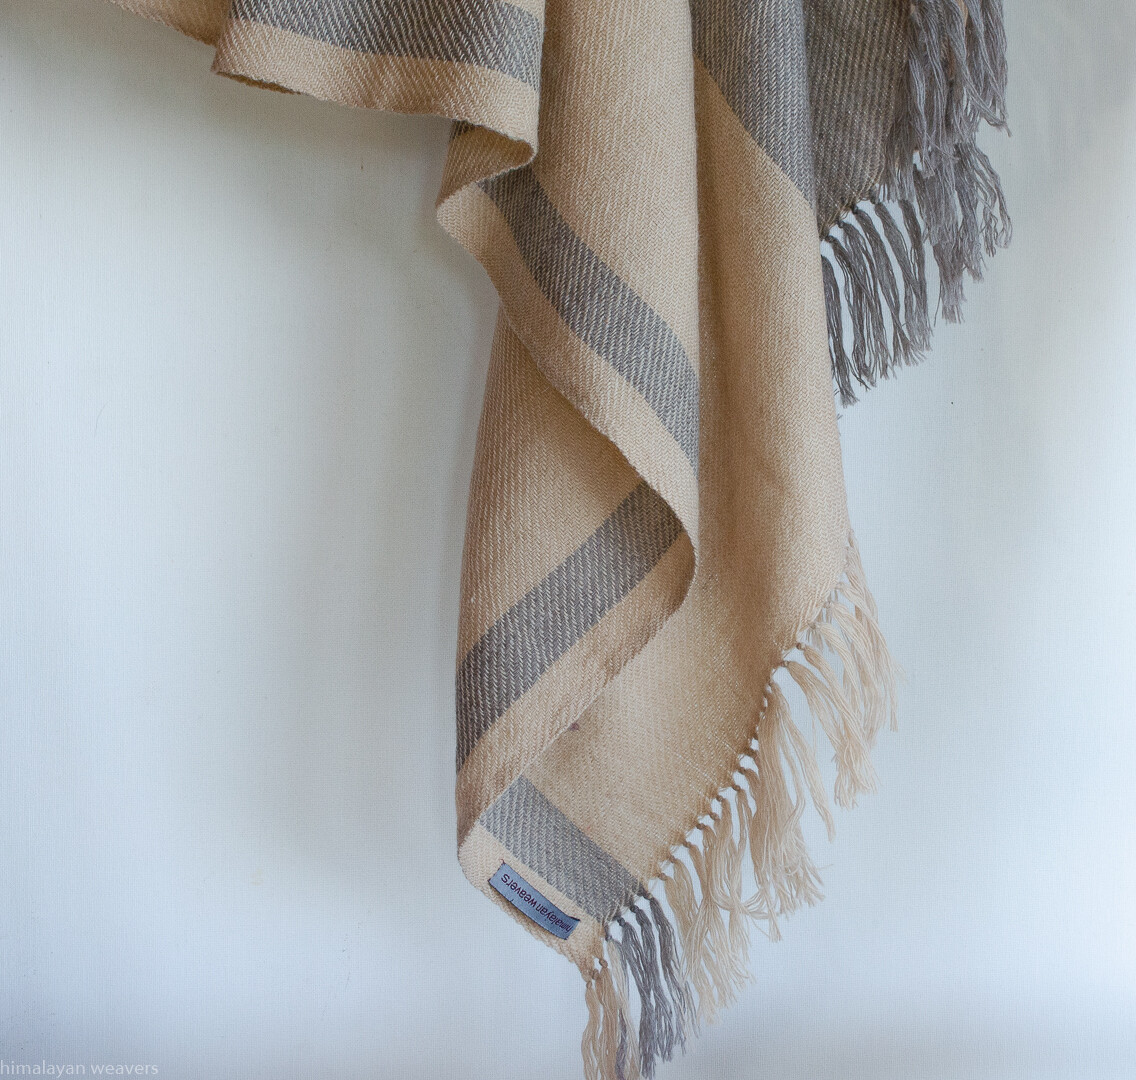 Large handwoven woolen shawl dyed with tea and harada